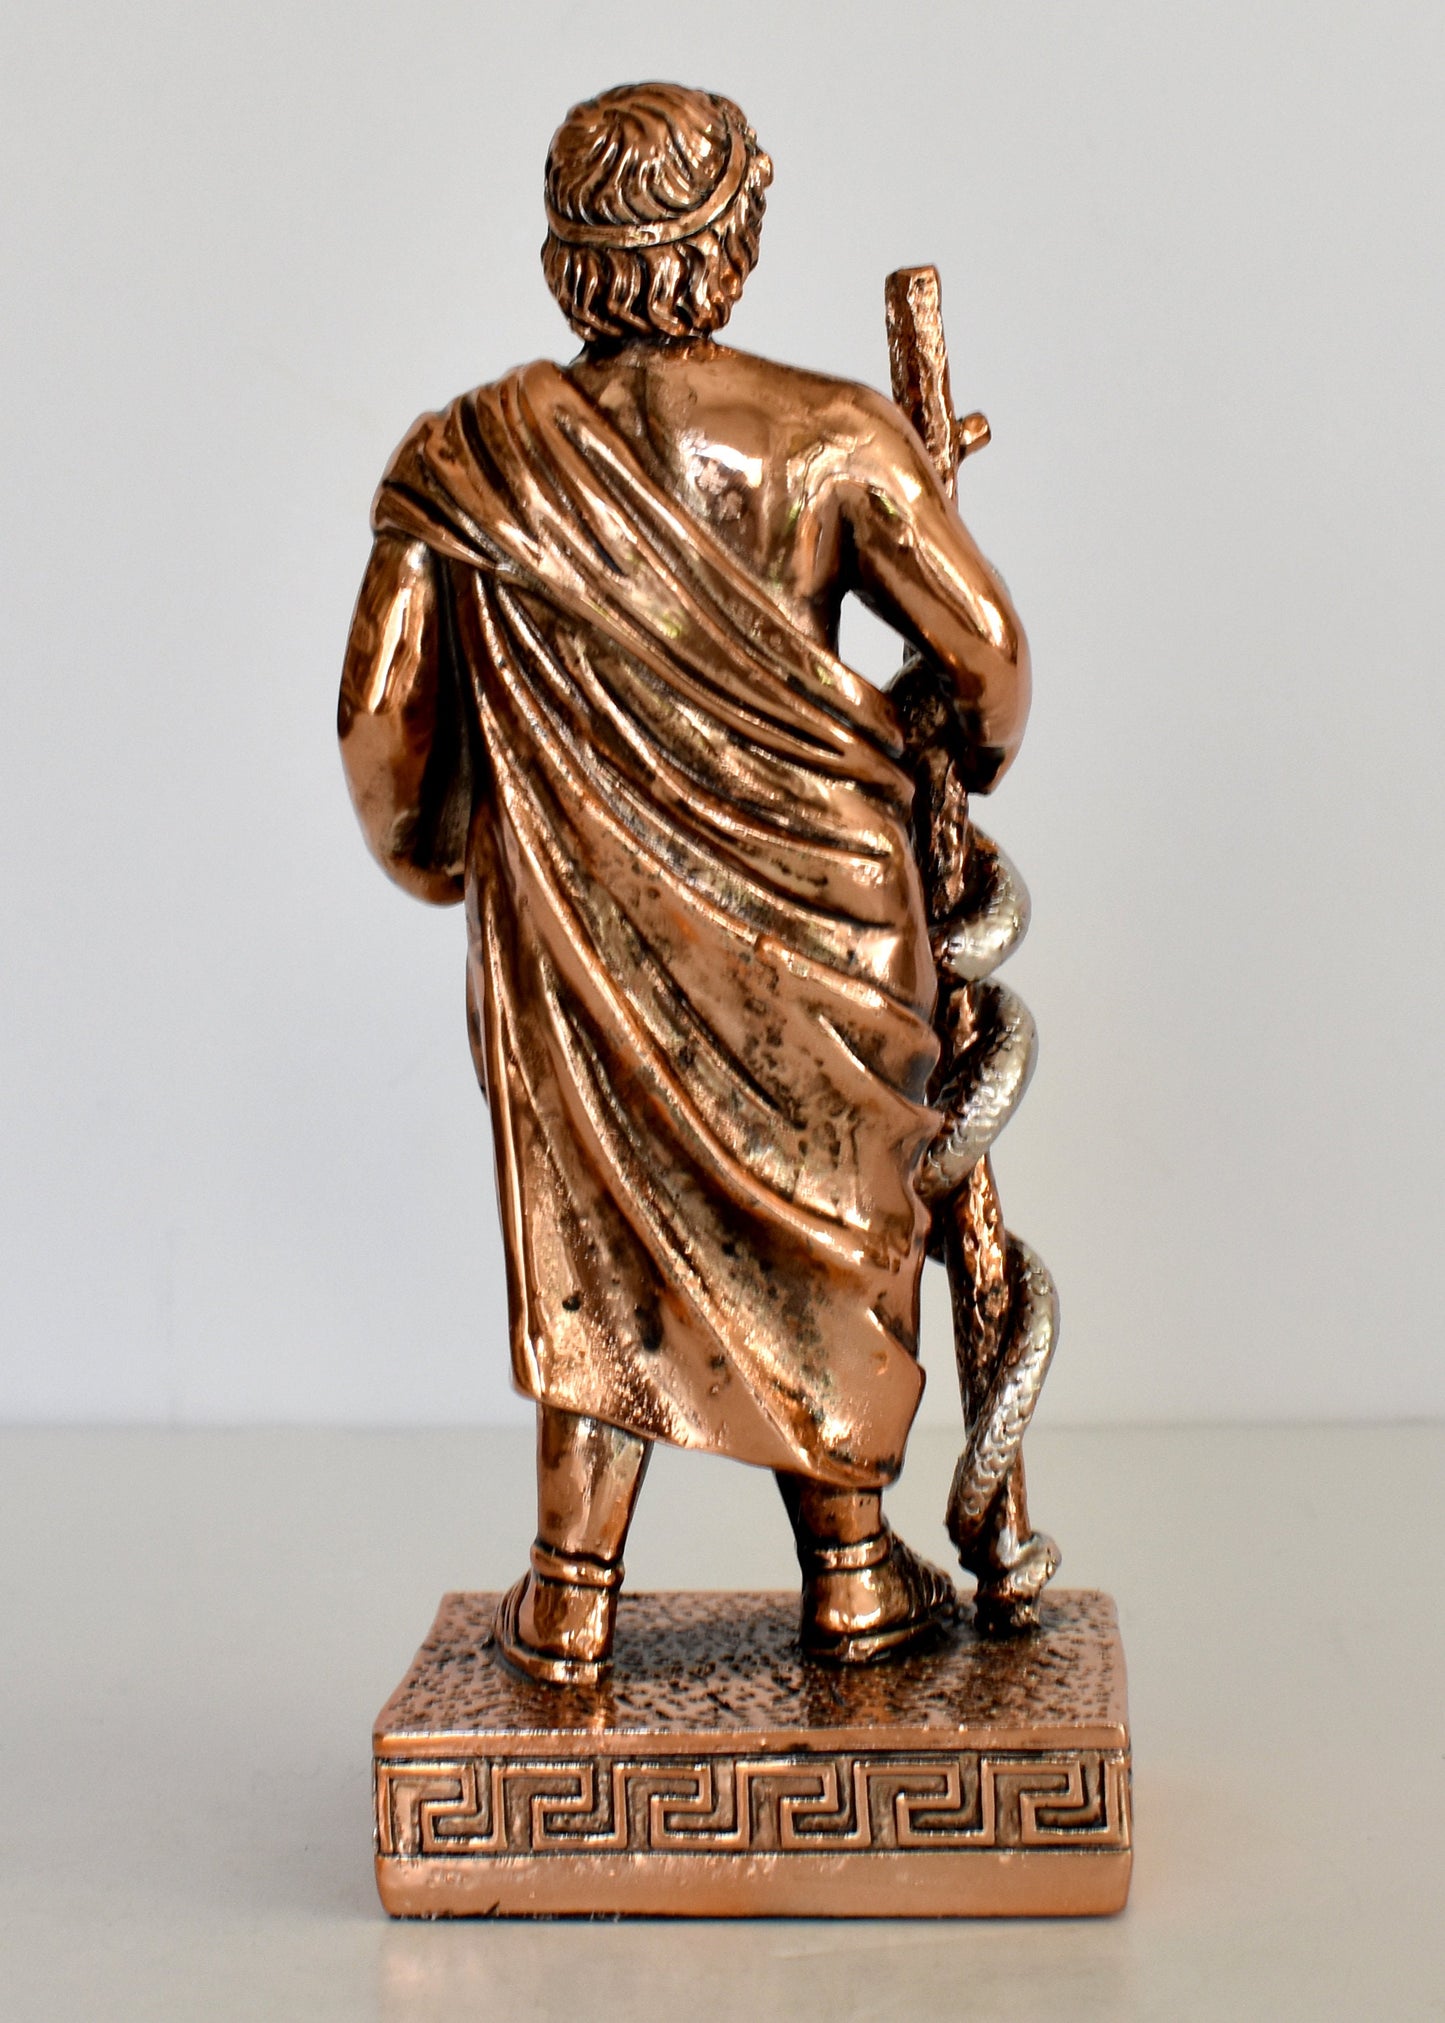 Asclepius - Ancient Greek God of Medicine and Doctors - Son of Apollo -Father of Hygeia, Iaso, Panacea, Aegle  - Copper Plated Alabaster